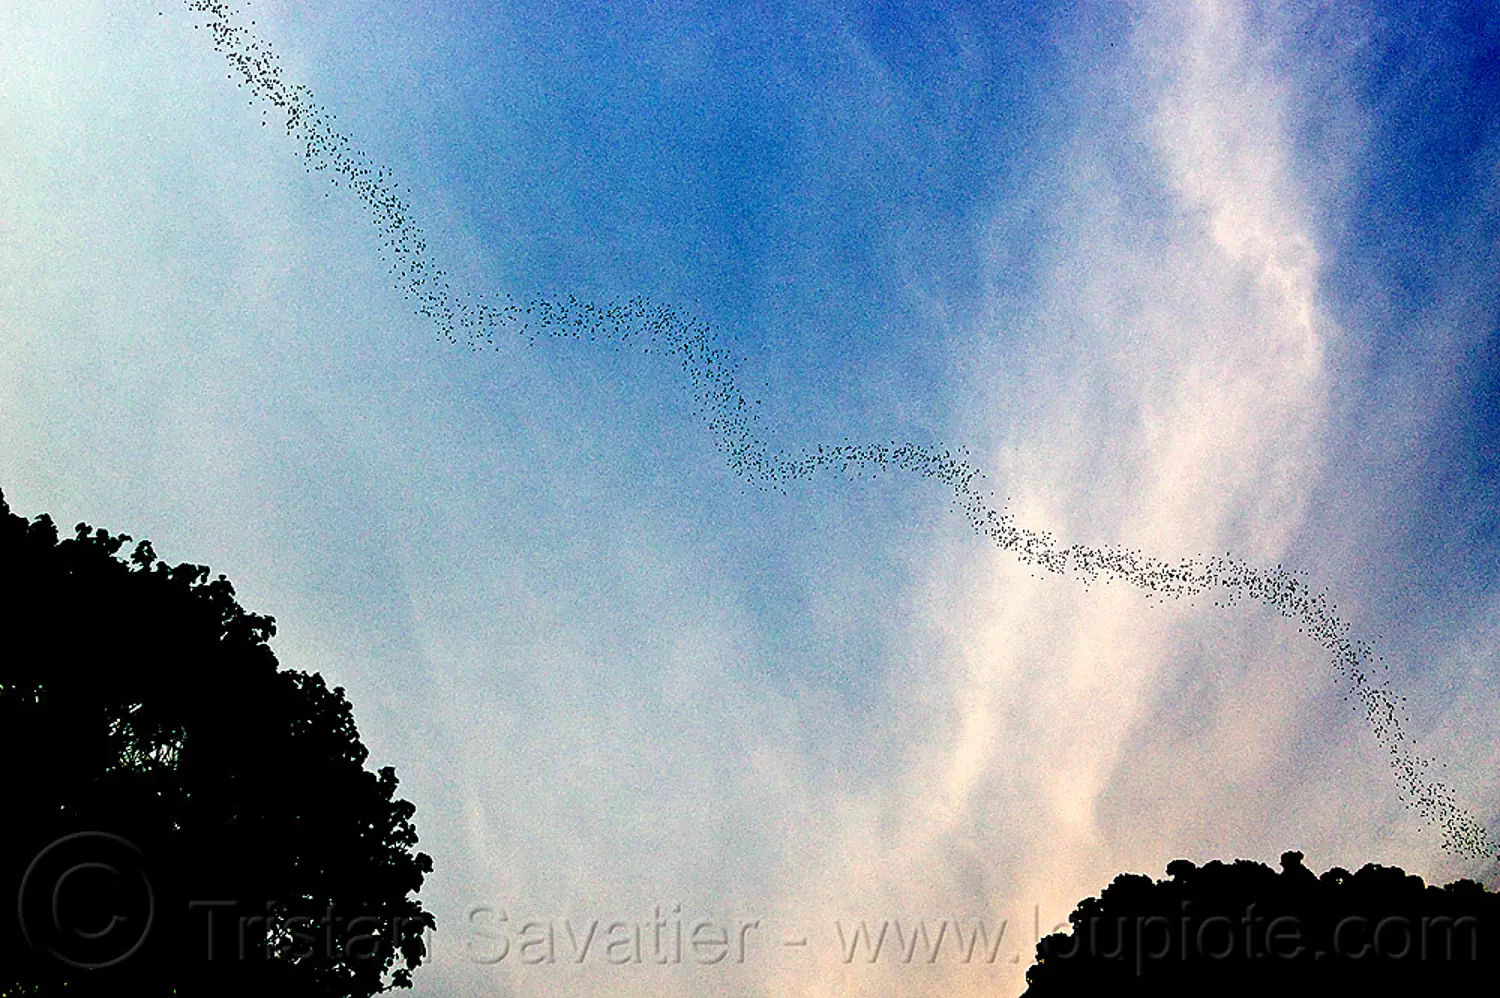 bat colony flying out of deer cave, bat colony, borneo, caving, chaerephon plicata, clouds, deer cave, flock, flying, gunung mulu national park, malaysia, natural cave, spelunking, swarm behavior, trees, wildlife, wrinkle lipped bats